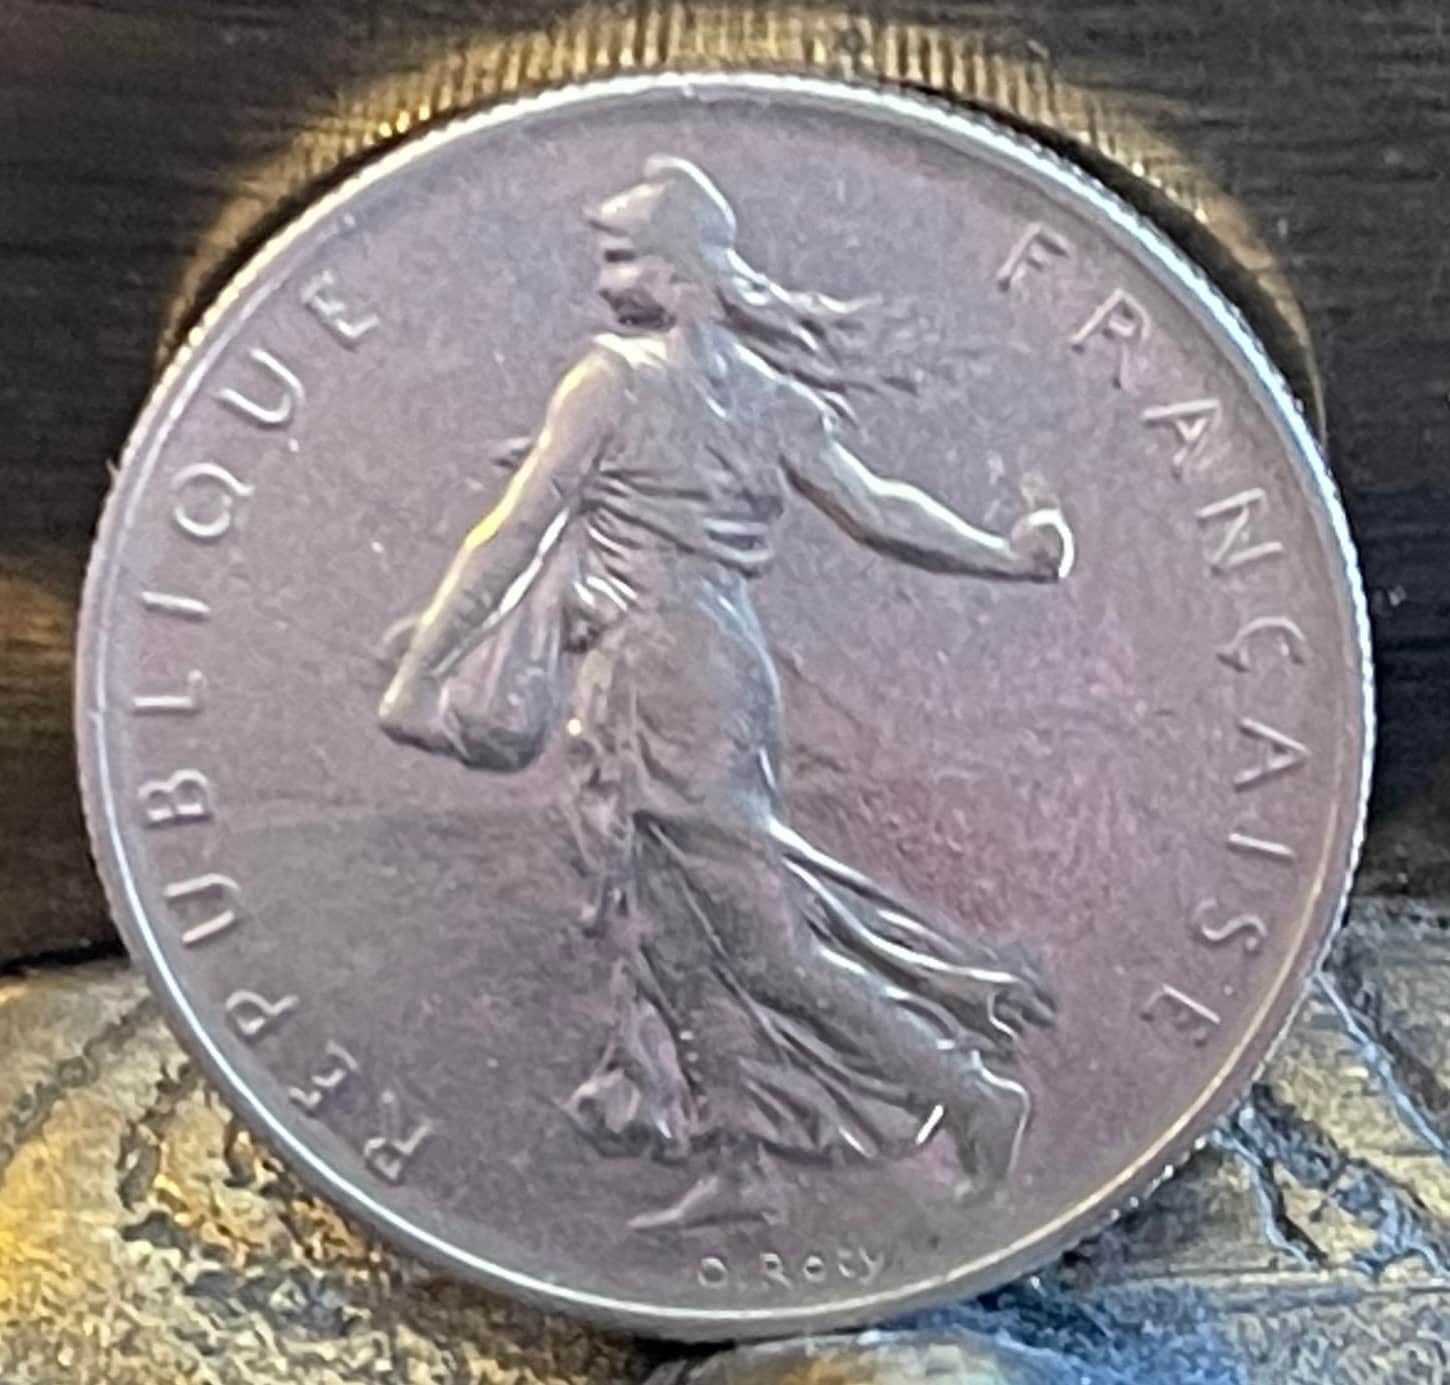 Marianne the Sower 1 Franc Authentic France Coin Money for Jewelry and Craft Making (La Semeuse)